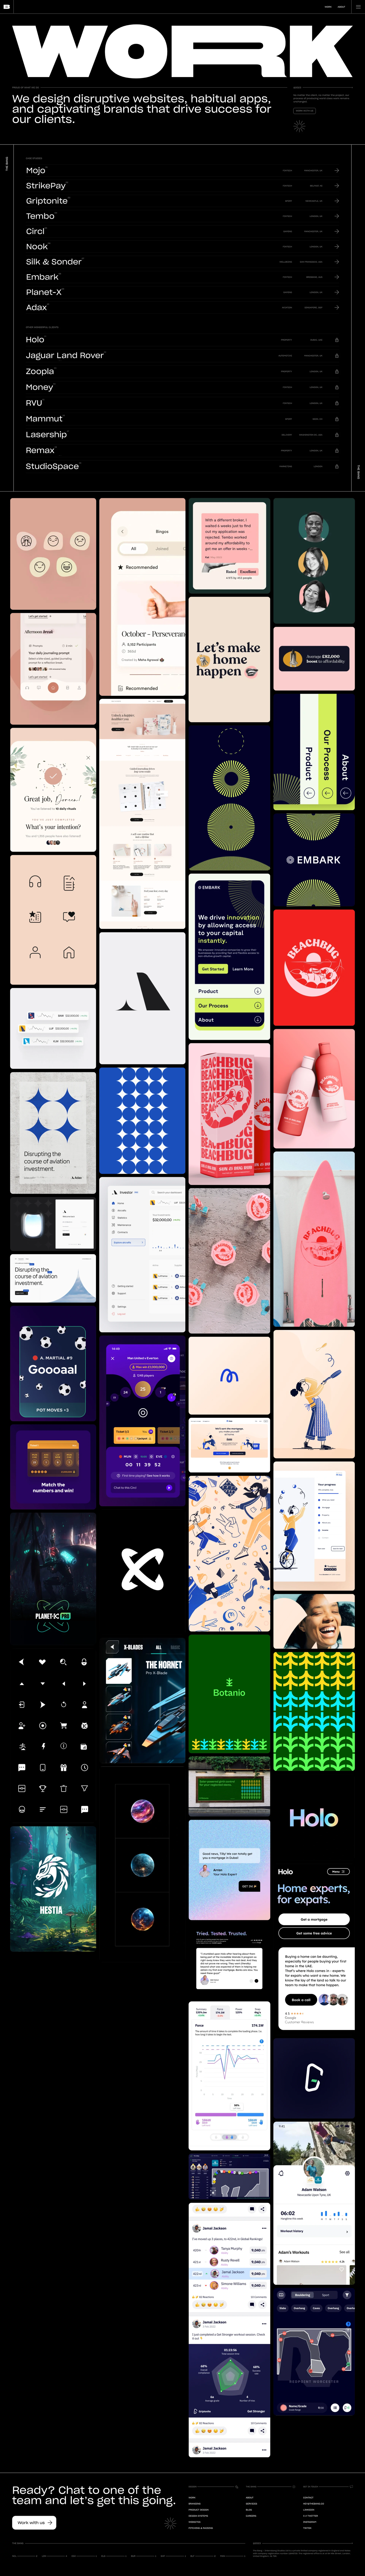 The Bang Landing Page Example: The Bang is a remote design studio crafting truly magnetic brands and disruptive products for companies looking to drive change.